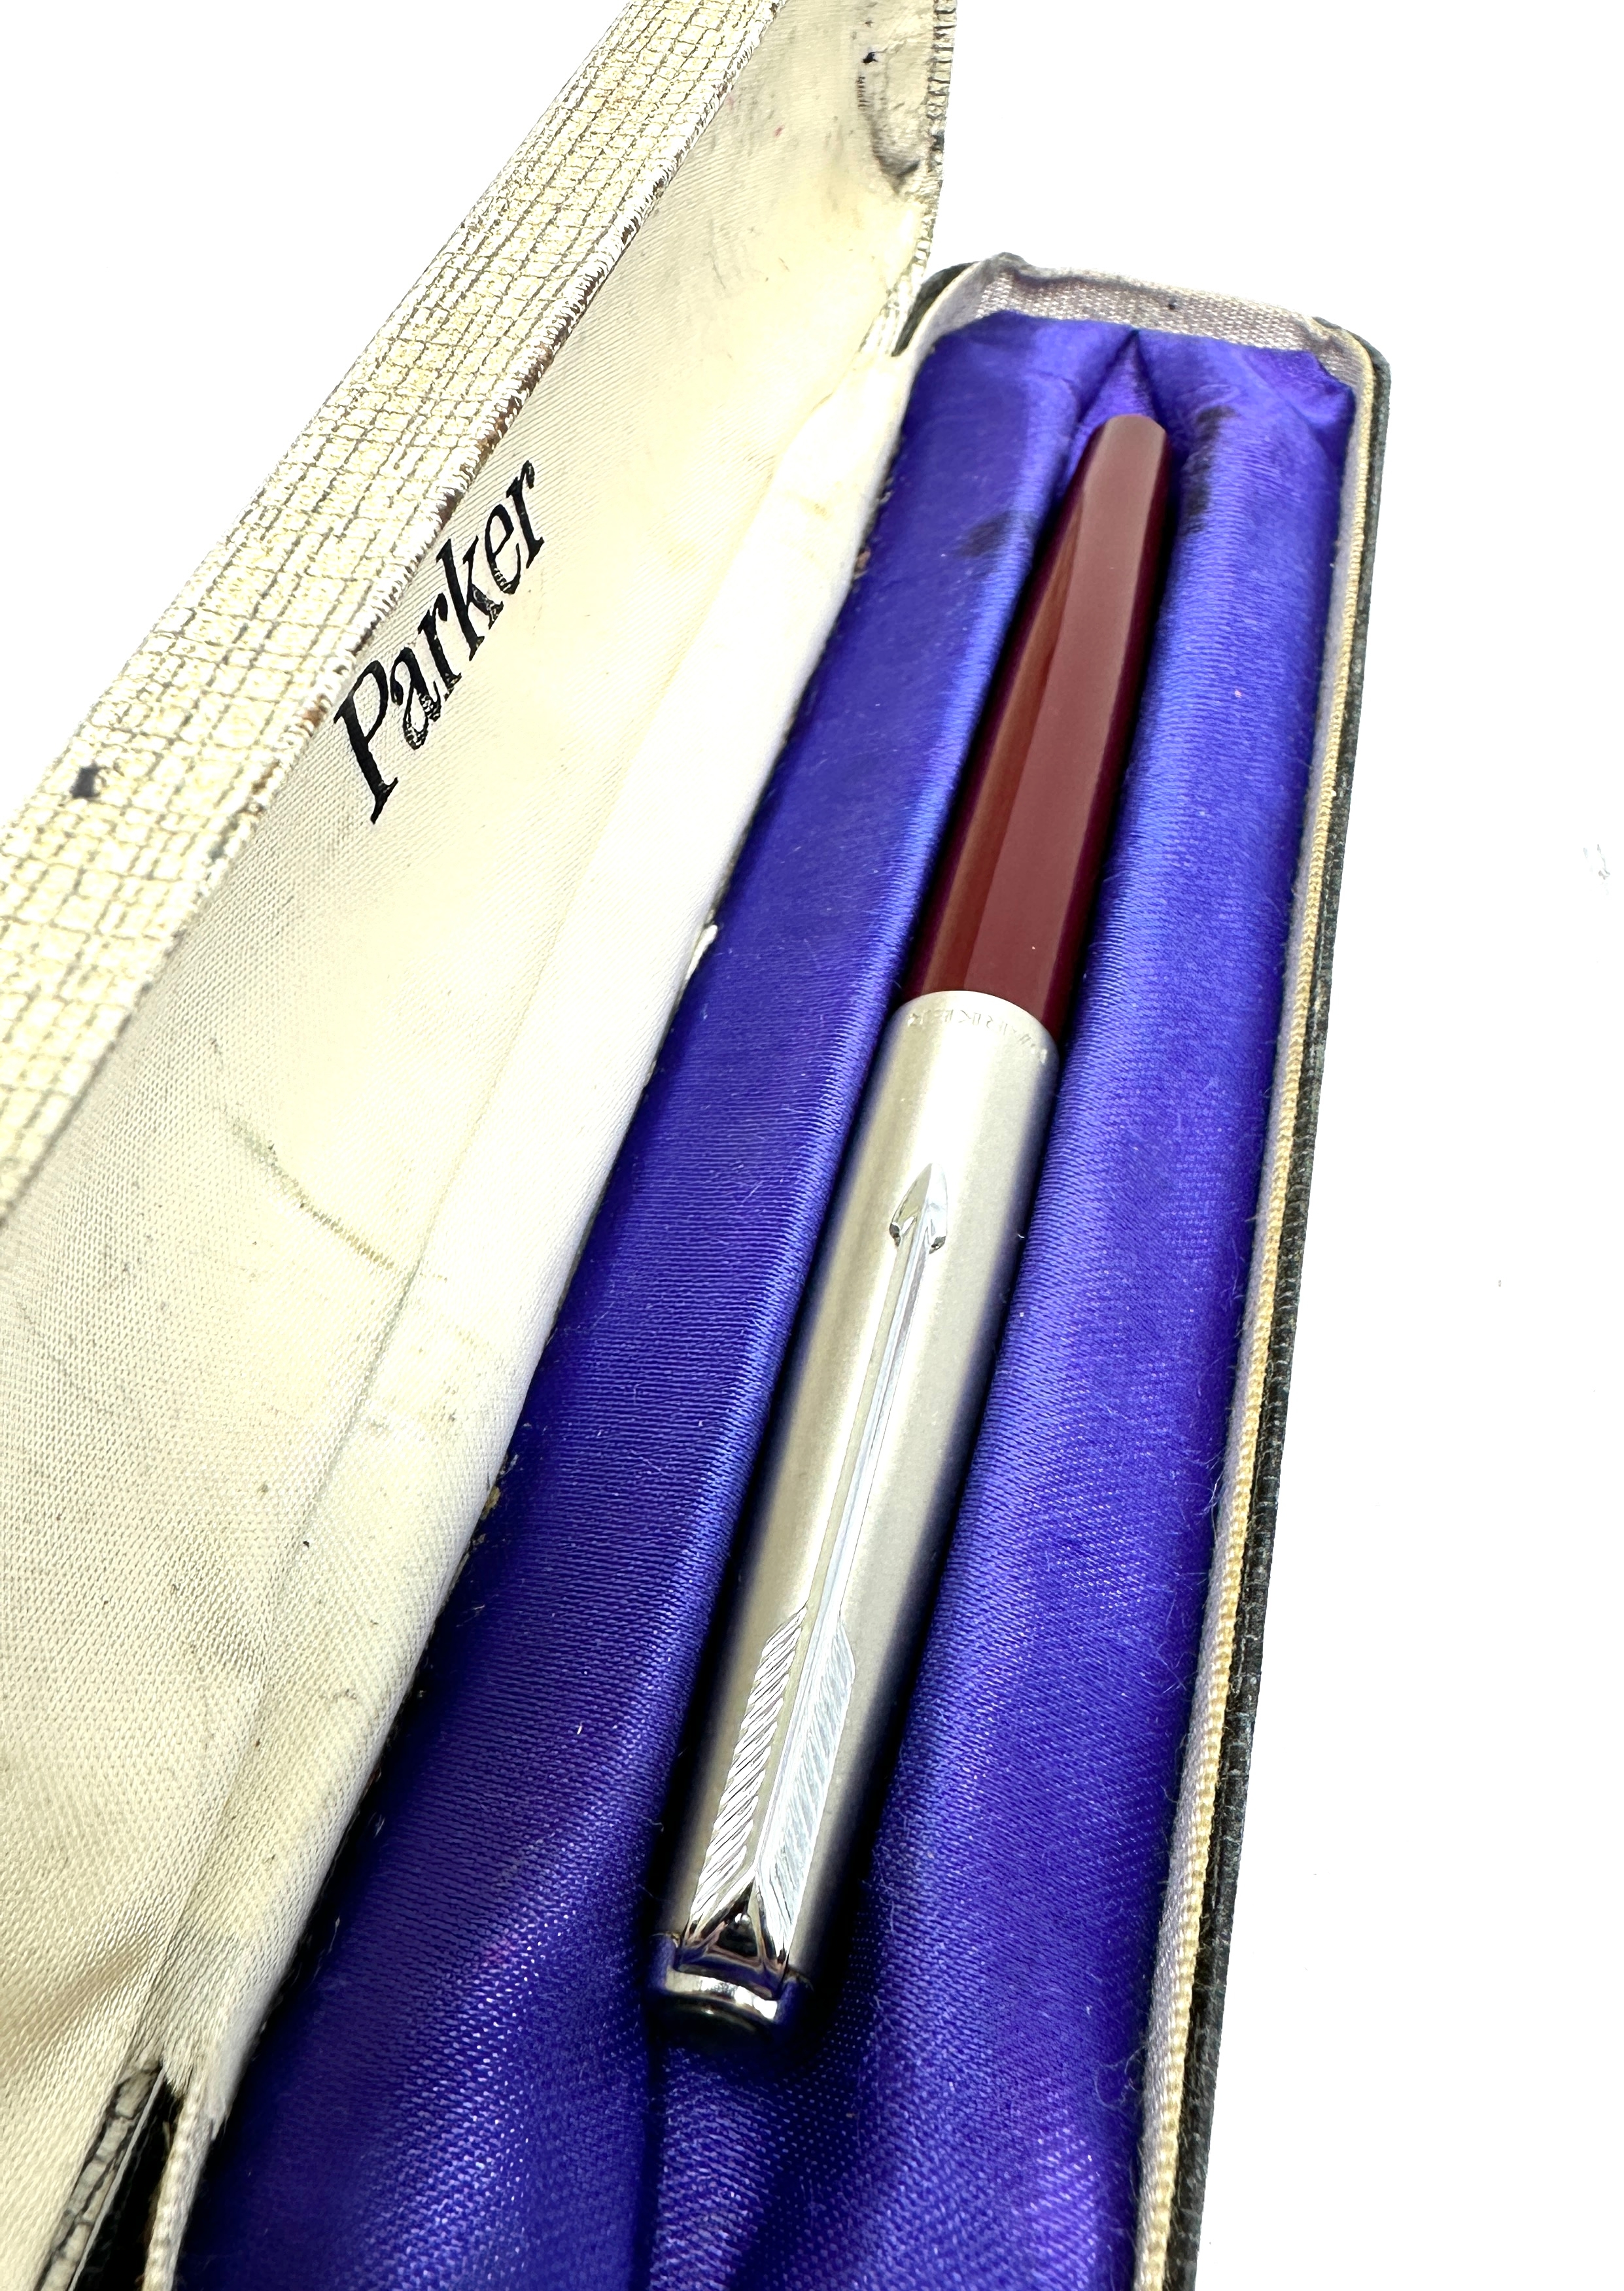 Boxed vintage parker 51 fountain pen - Image 2 of 4